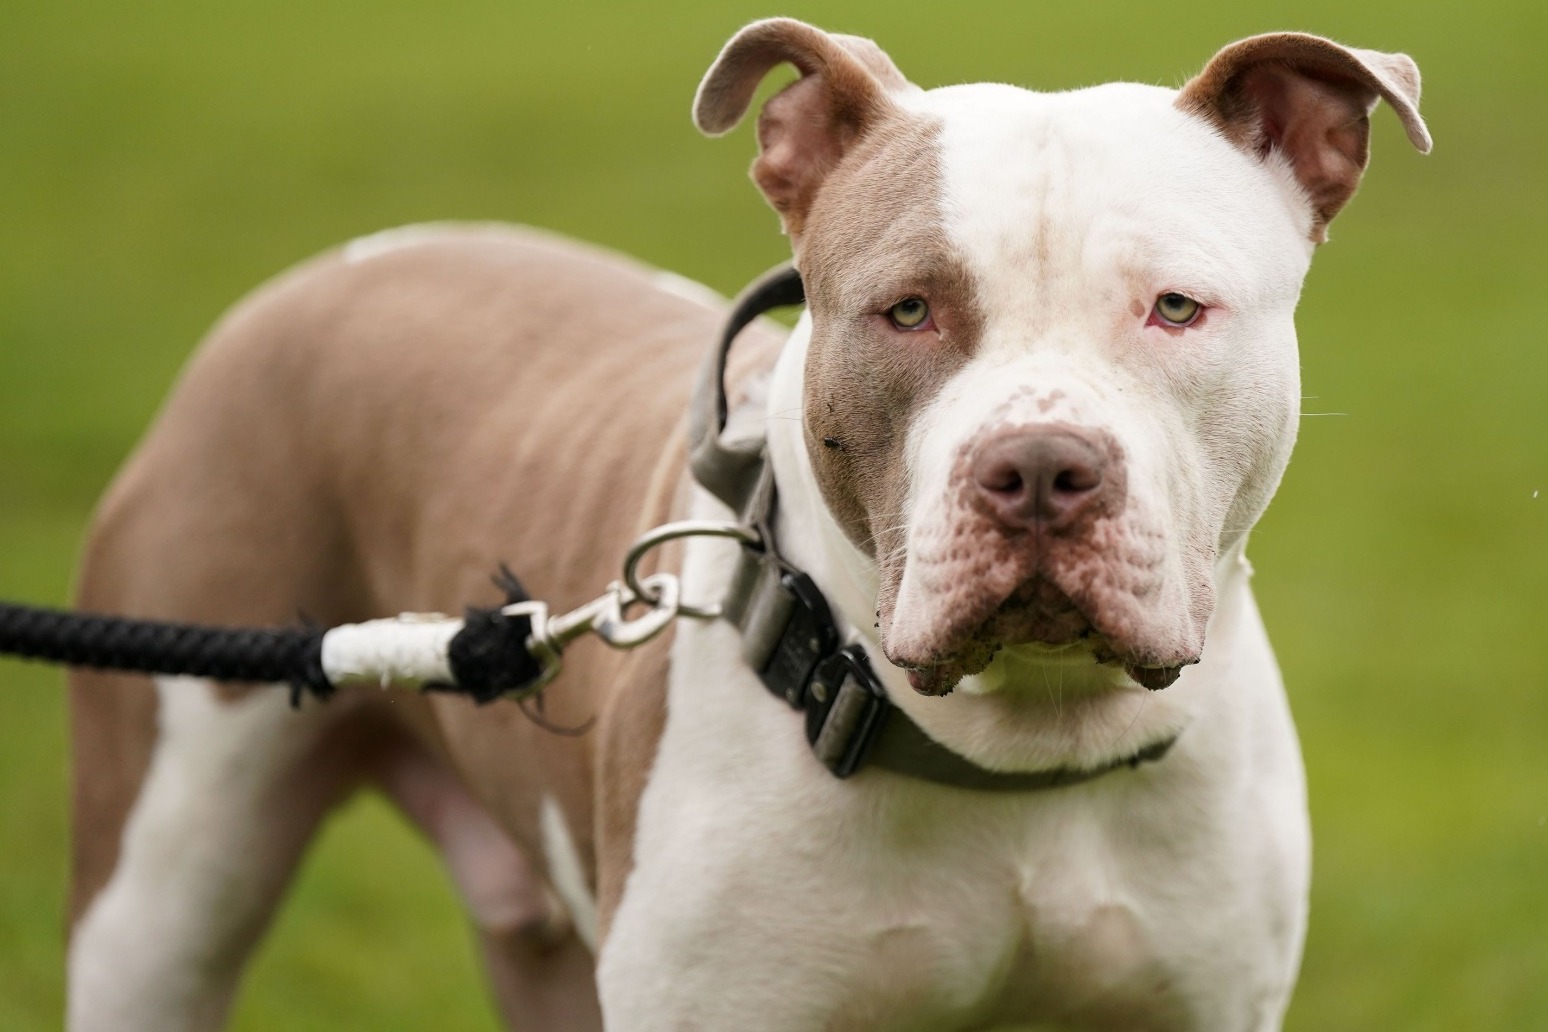 Thousands of XL bully dogs spared 